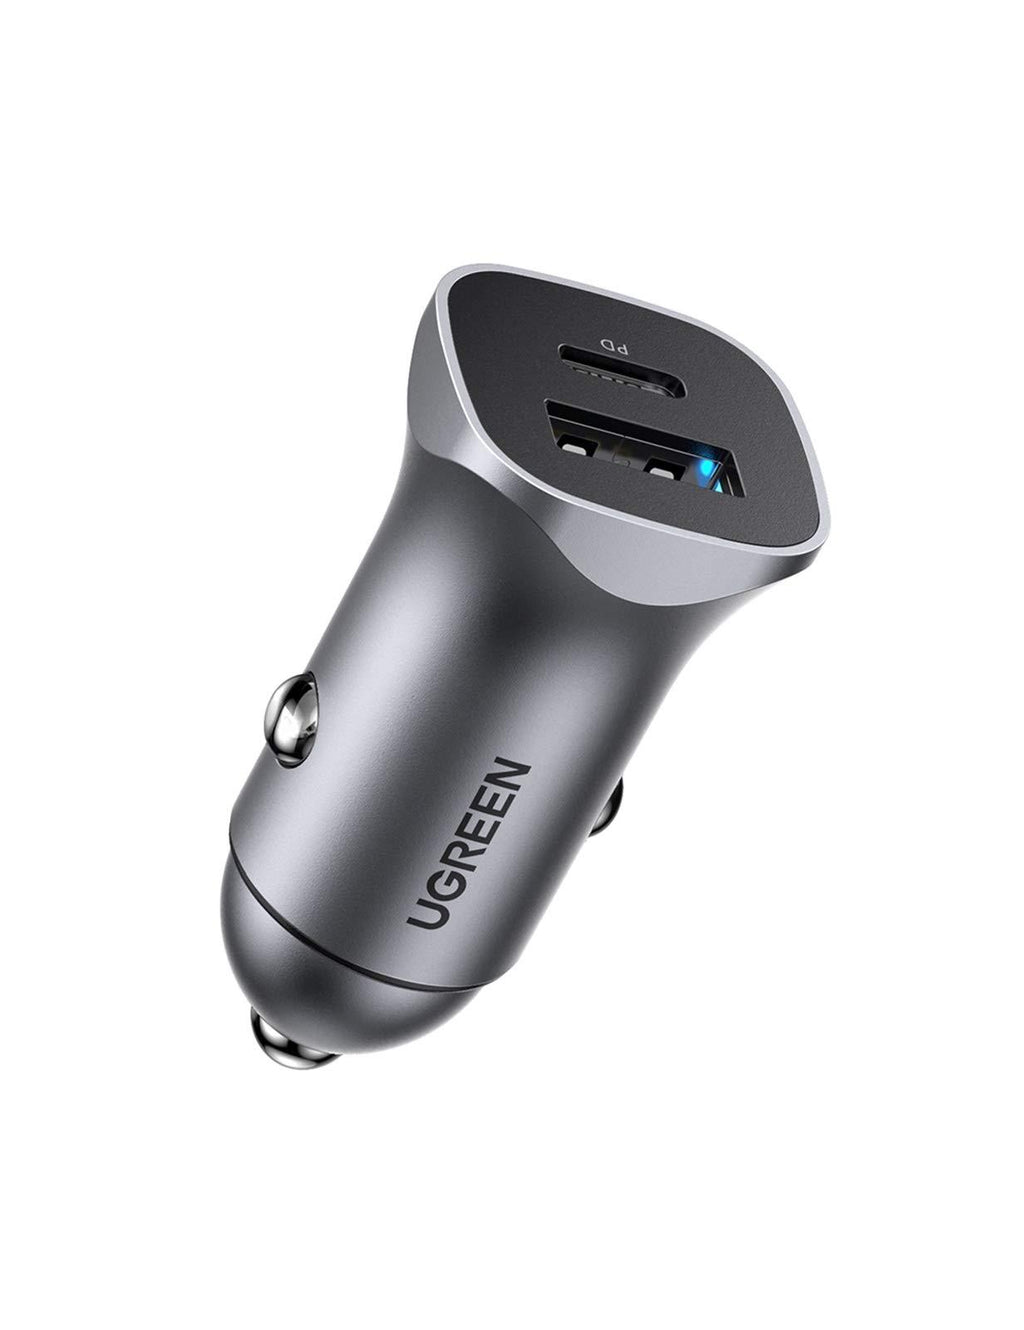 UGREEN 20W USB C Car Charger PD QC3.0 Dual Ports Fast Charge Car Adapter Metal Cigarette Lighter Compatible with iPhone 12 Mini Pro Max 11 XS XR X 8 SE Samsung Galaxy S21 S20 Note 20 iPad LG Pixel